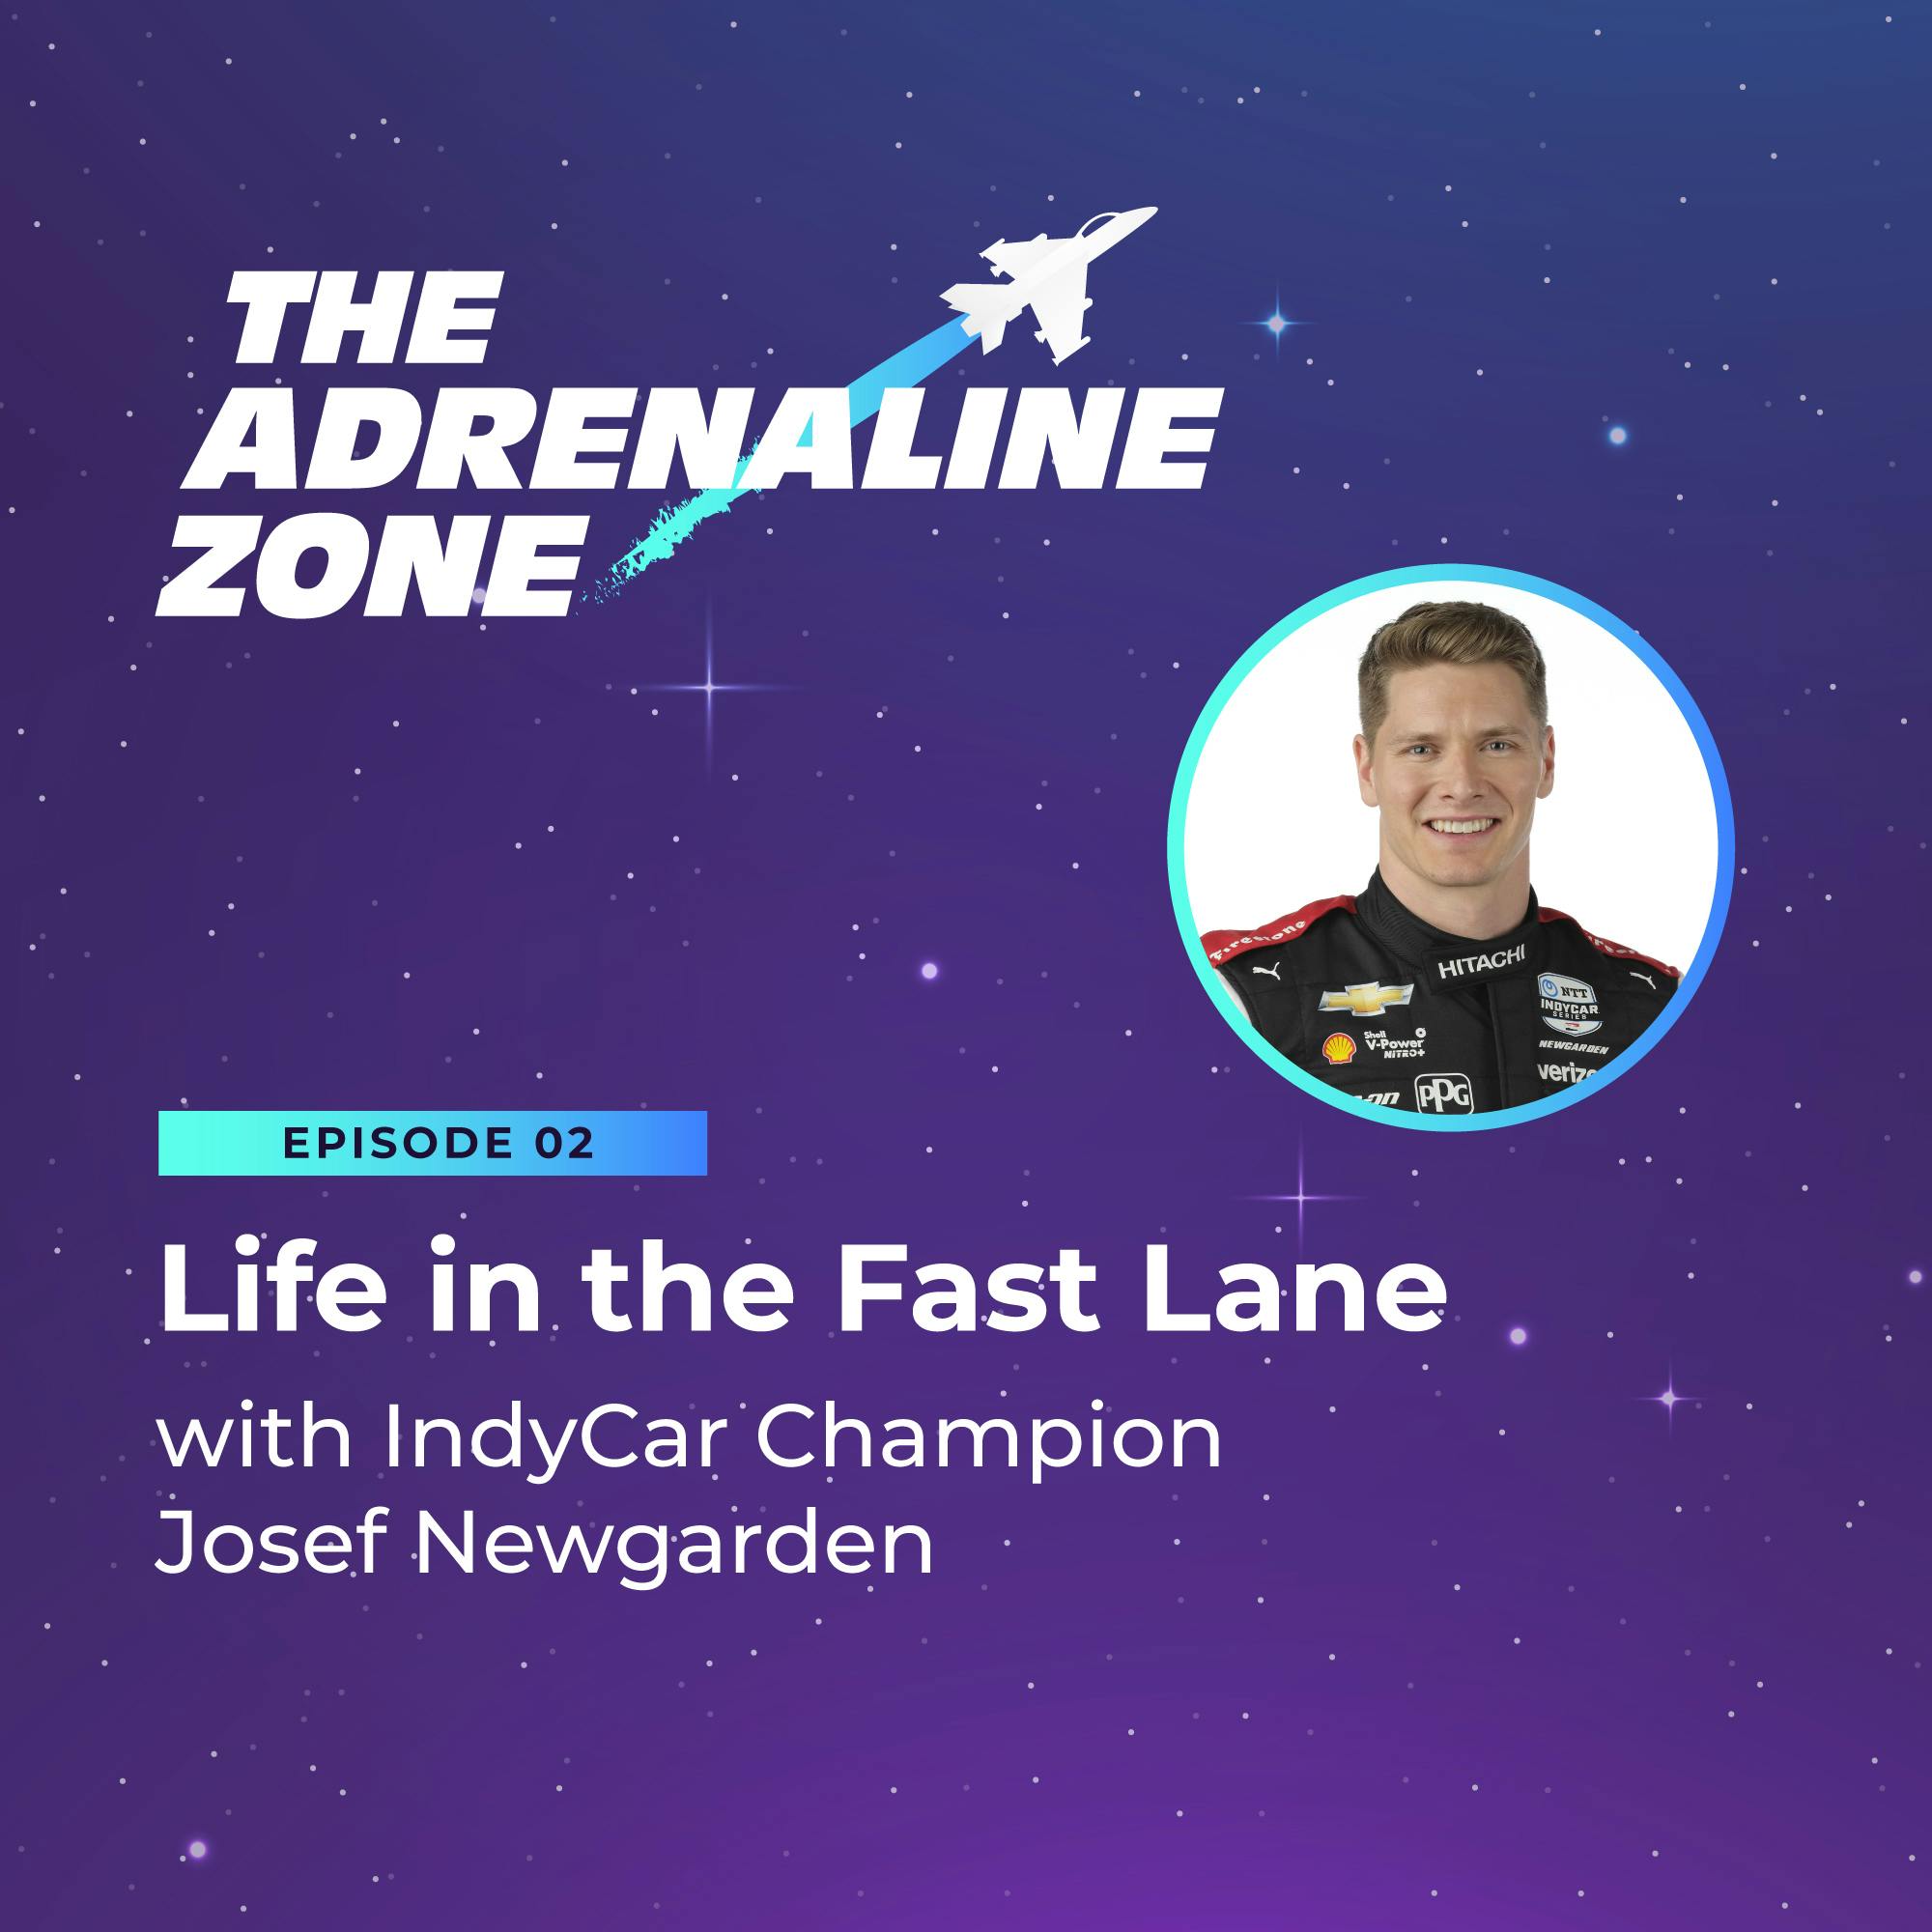 Life in the Fast Lane with Josef Newgarden, IndyCar Champion